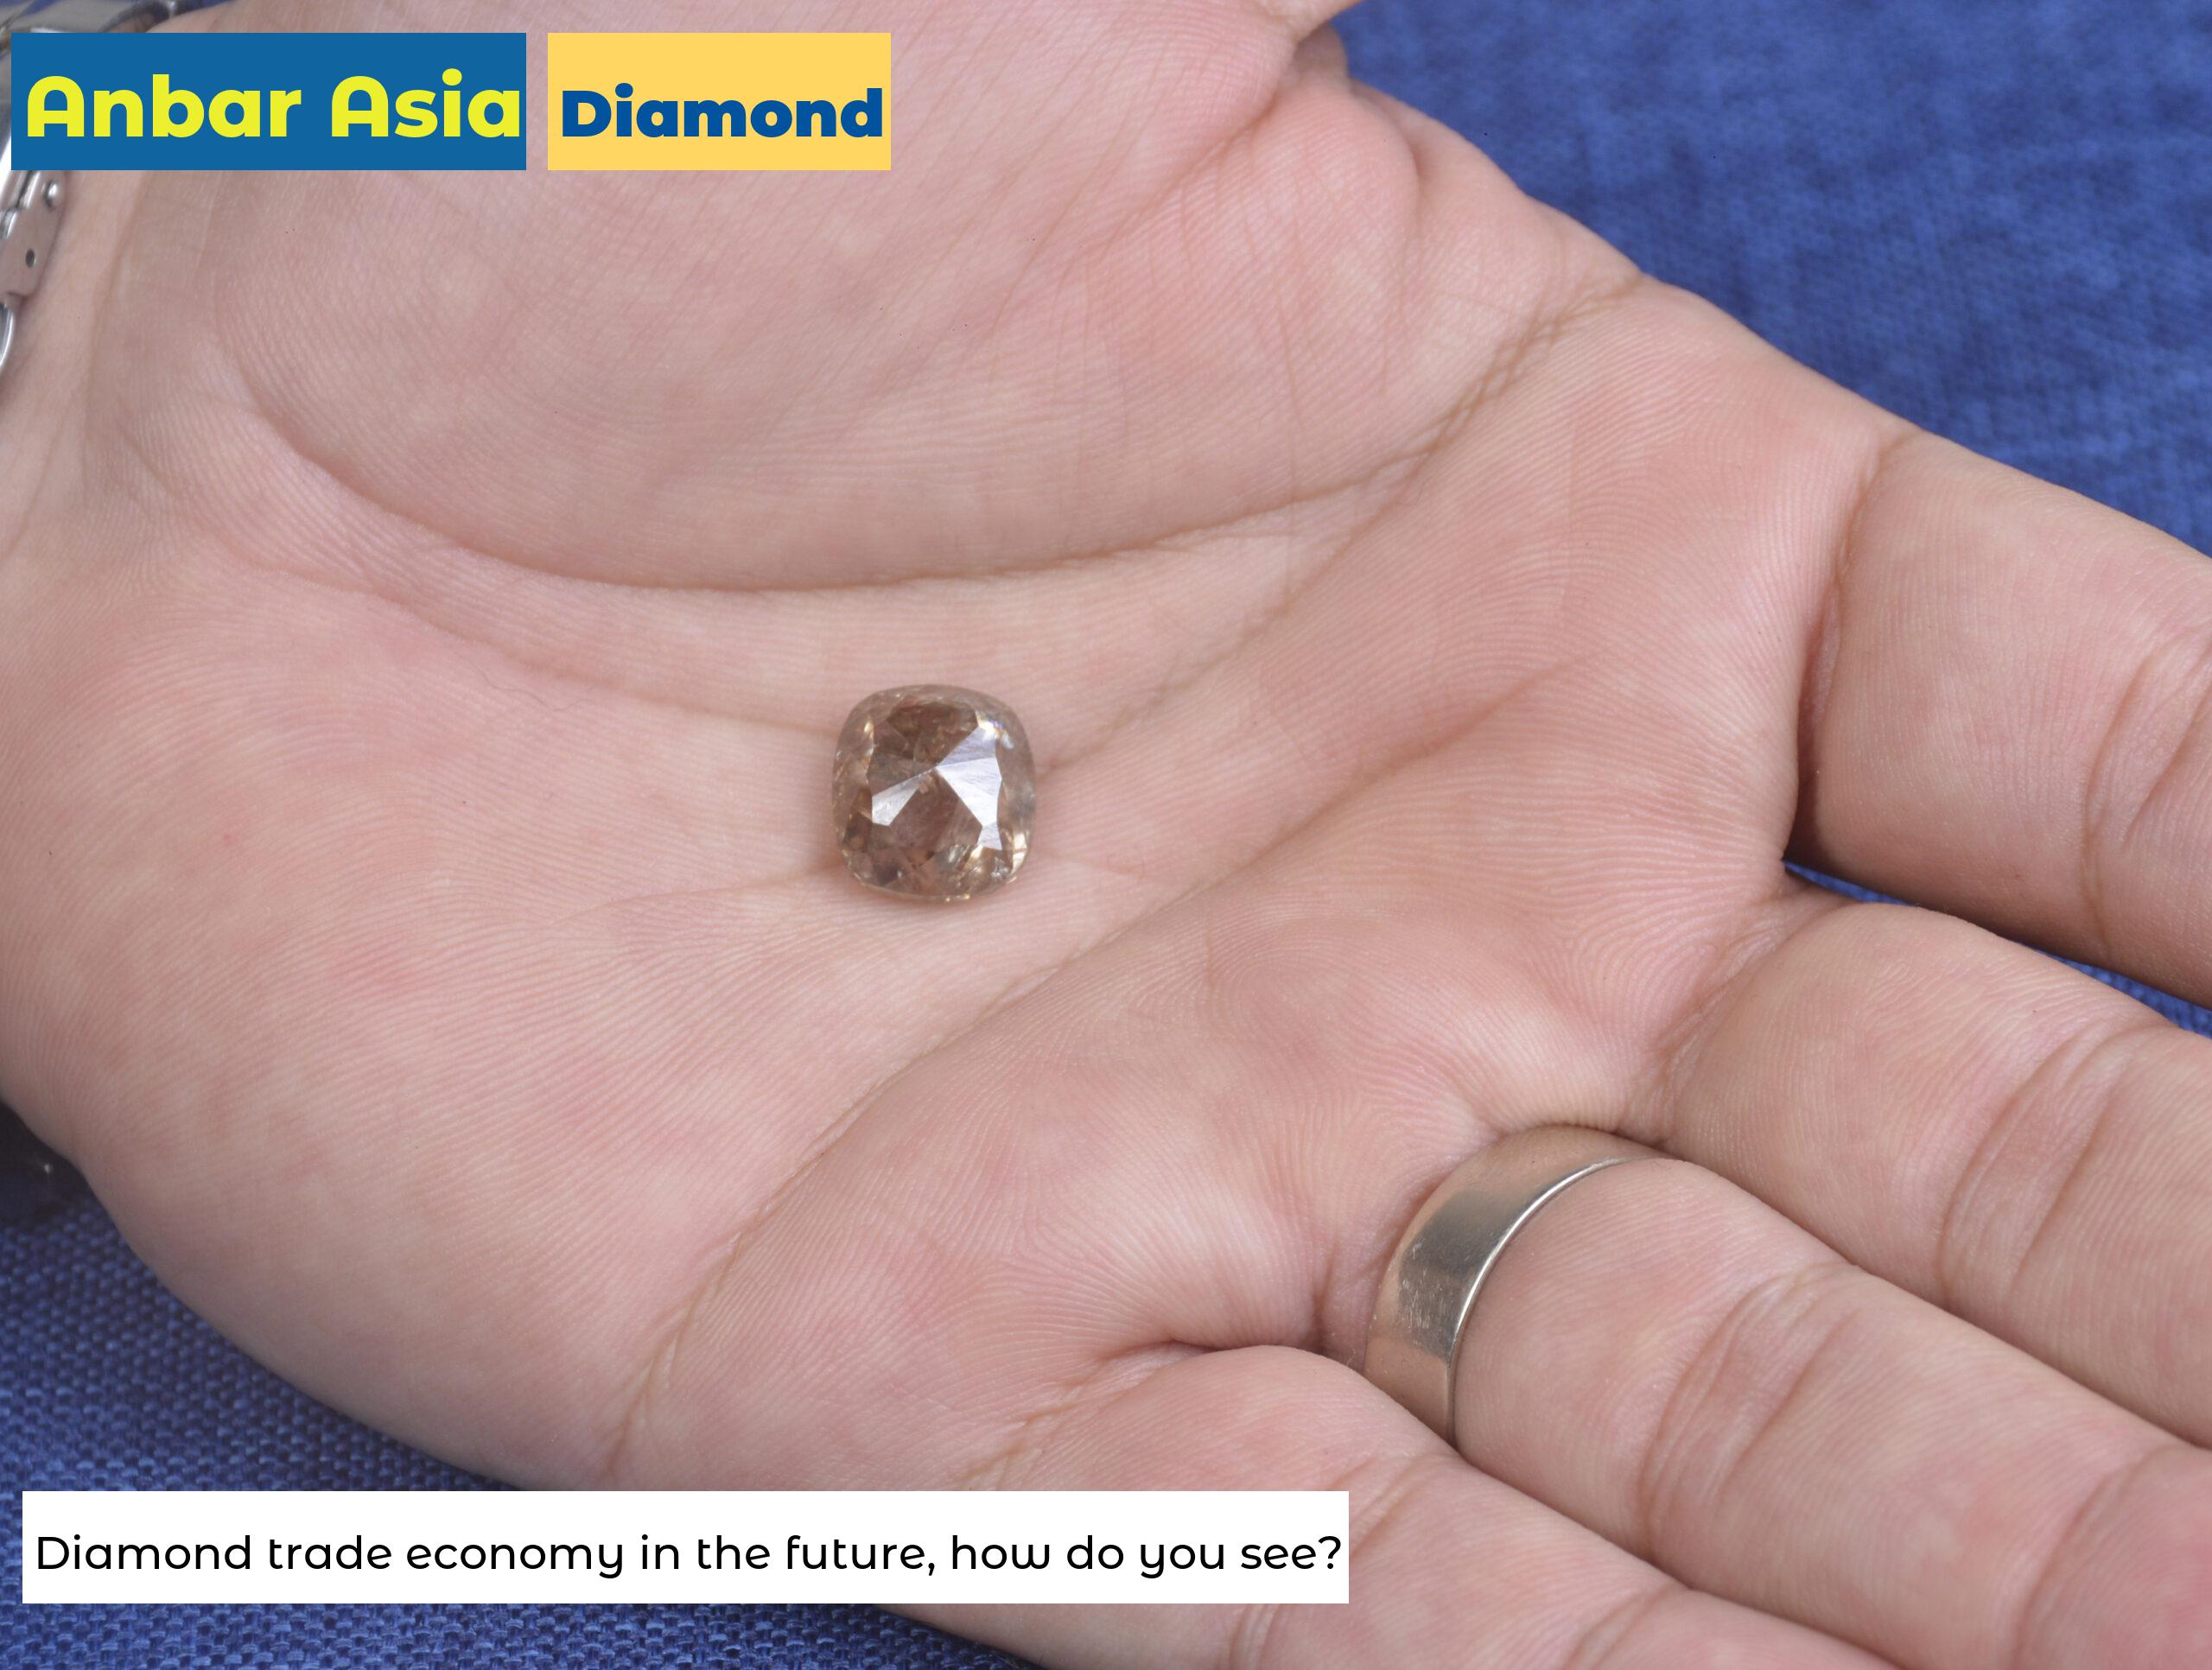 Diamond trade economy in the future, how do you see?